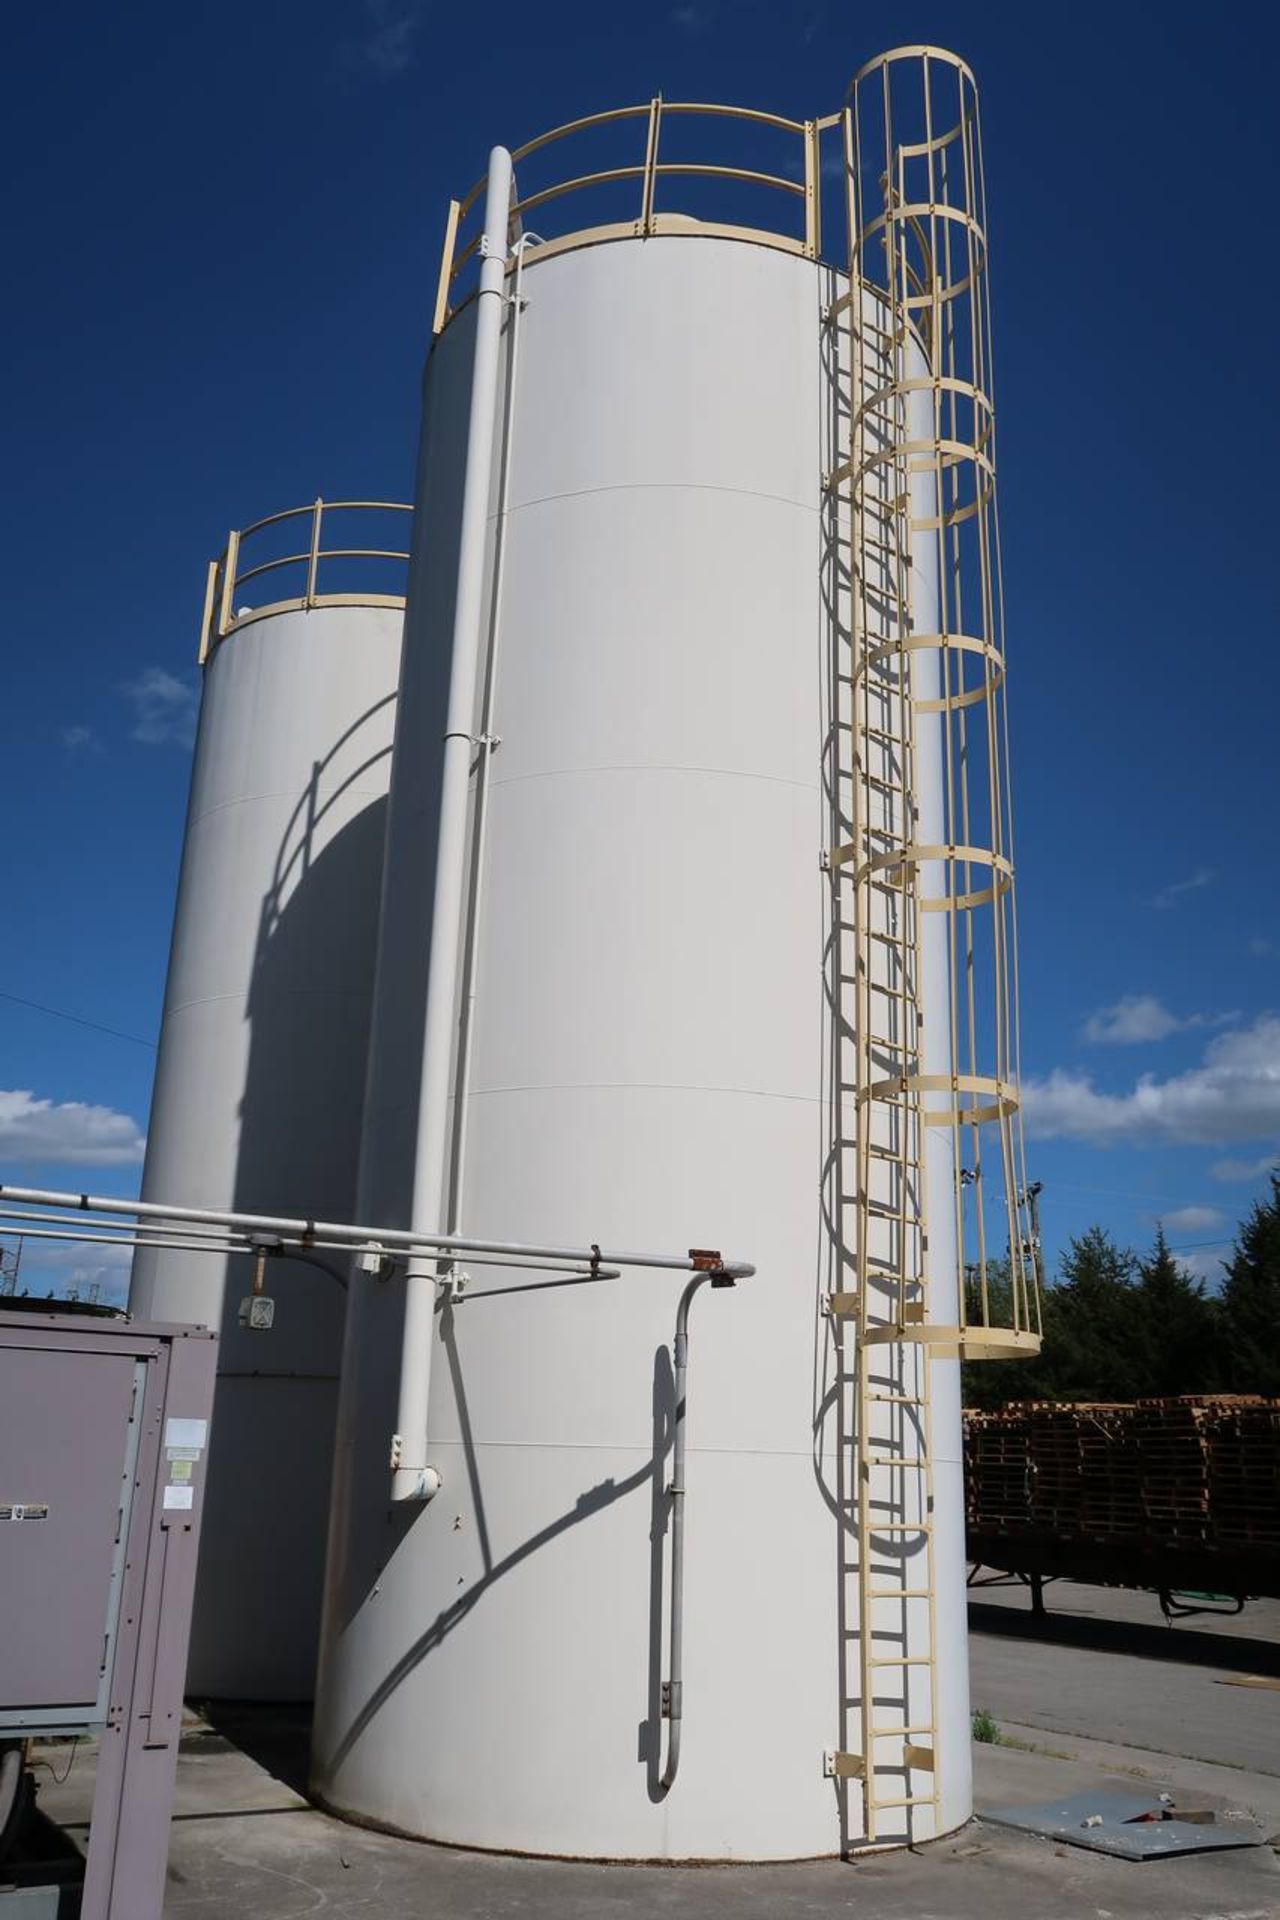 West Material Silo - Image 2 of 4